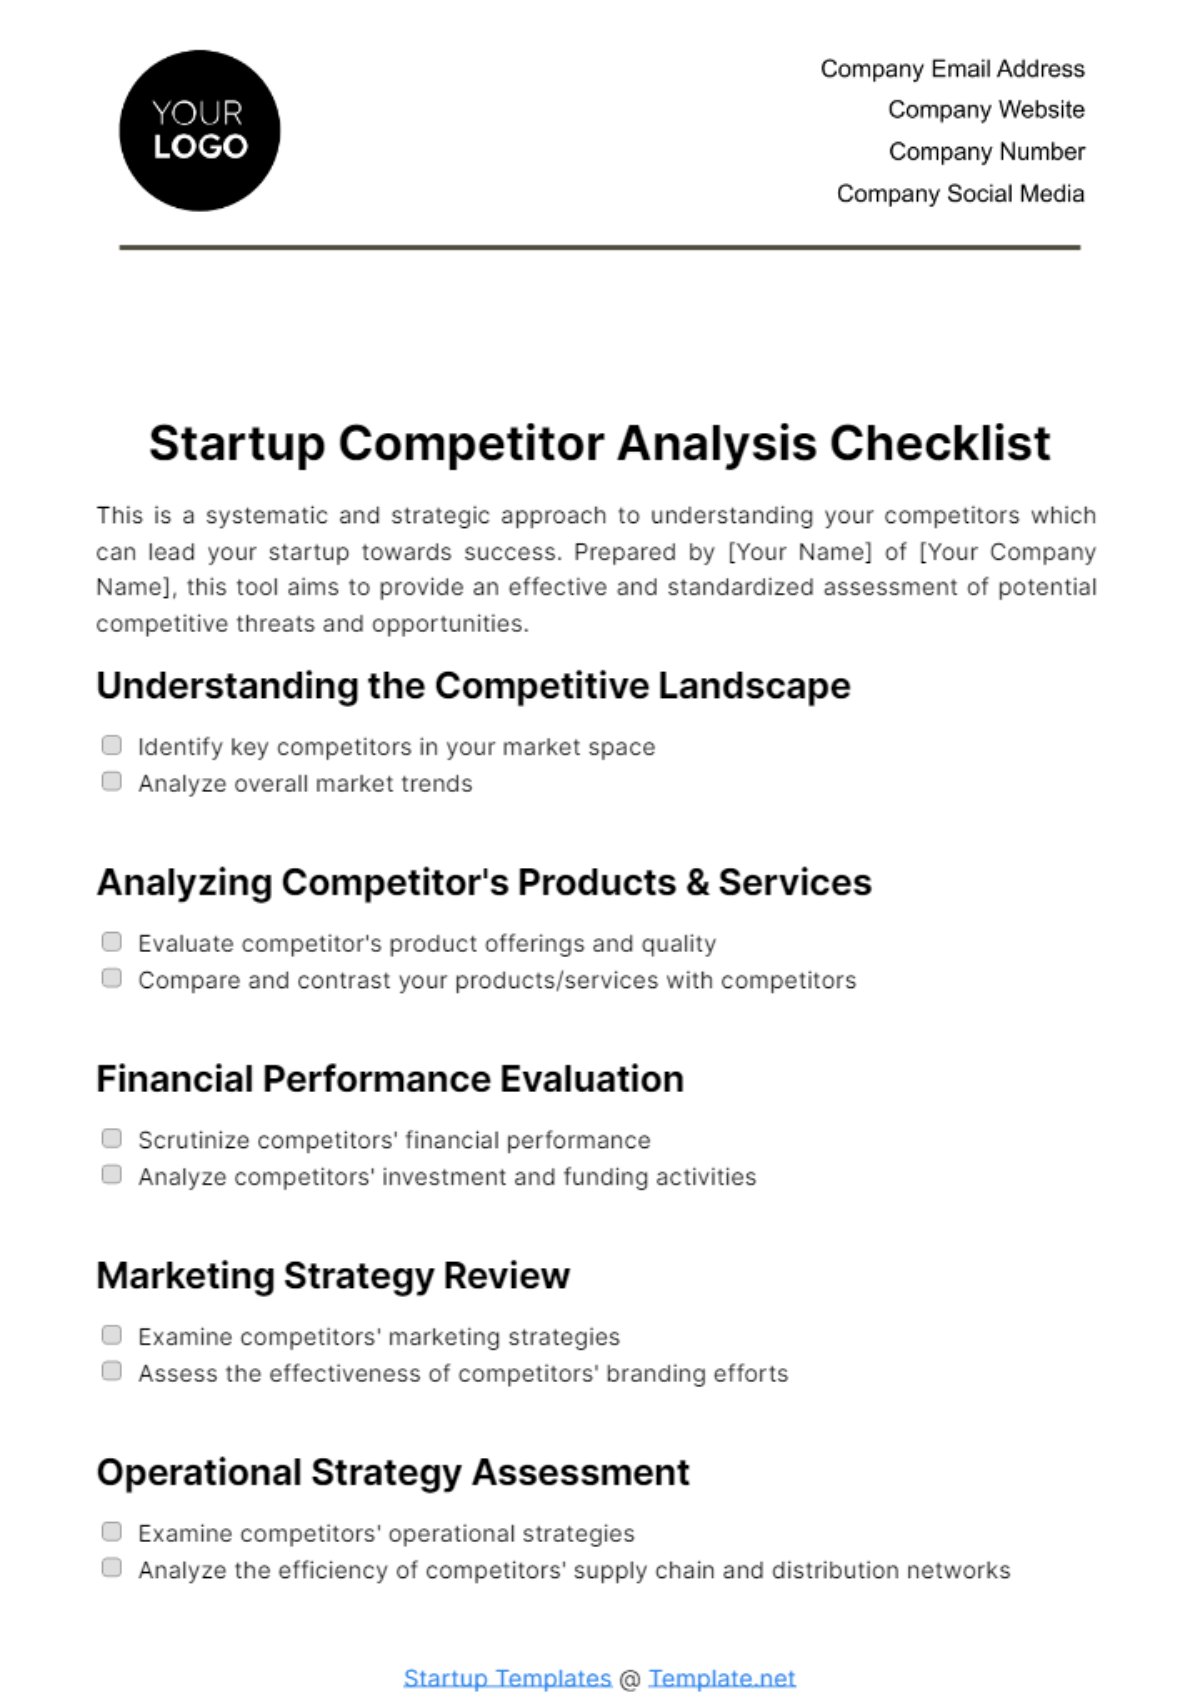 Startup Competitor Analysis Checklist Template